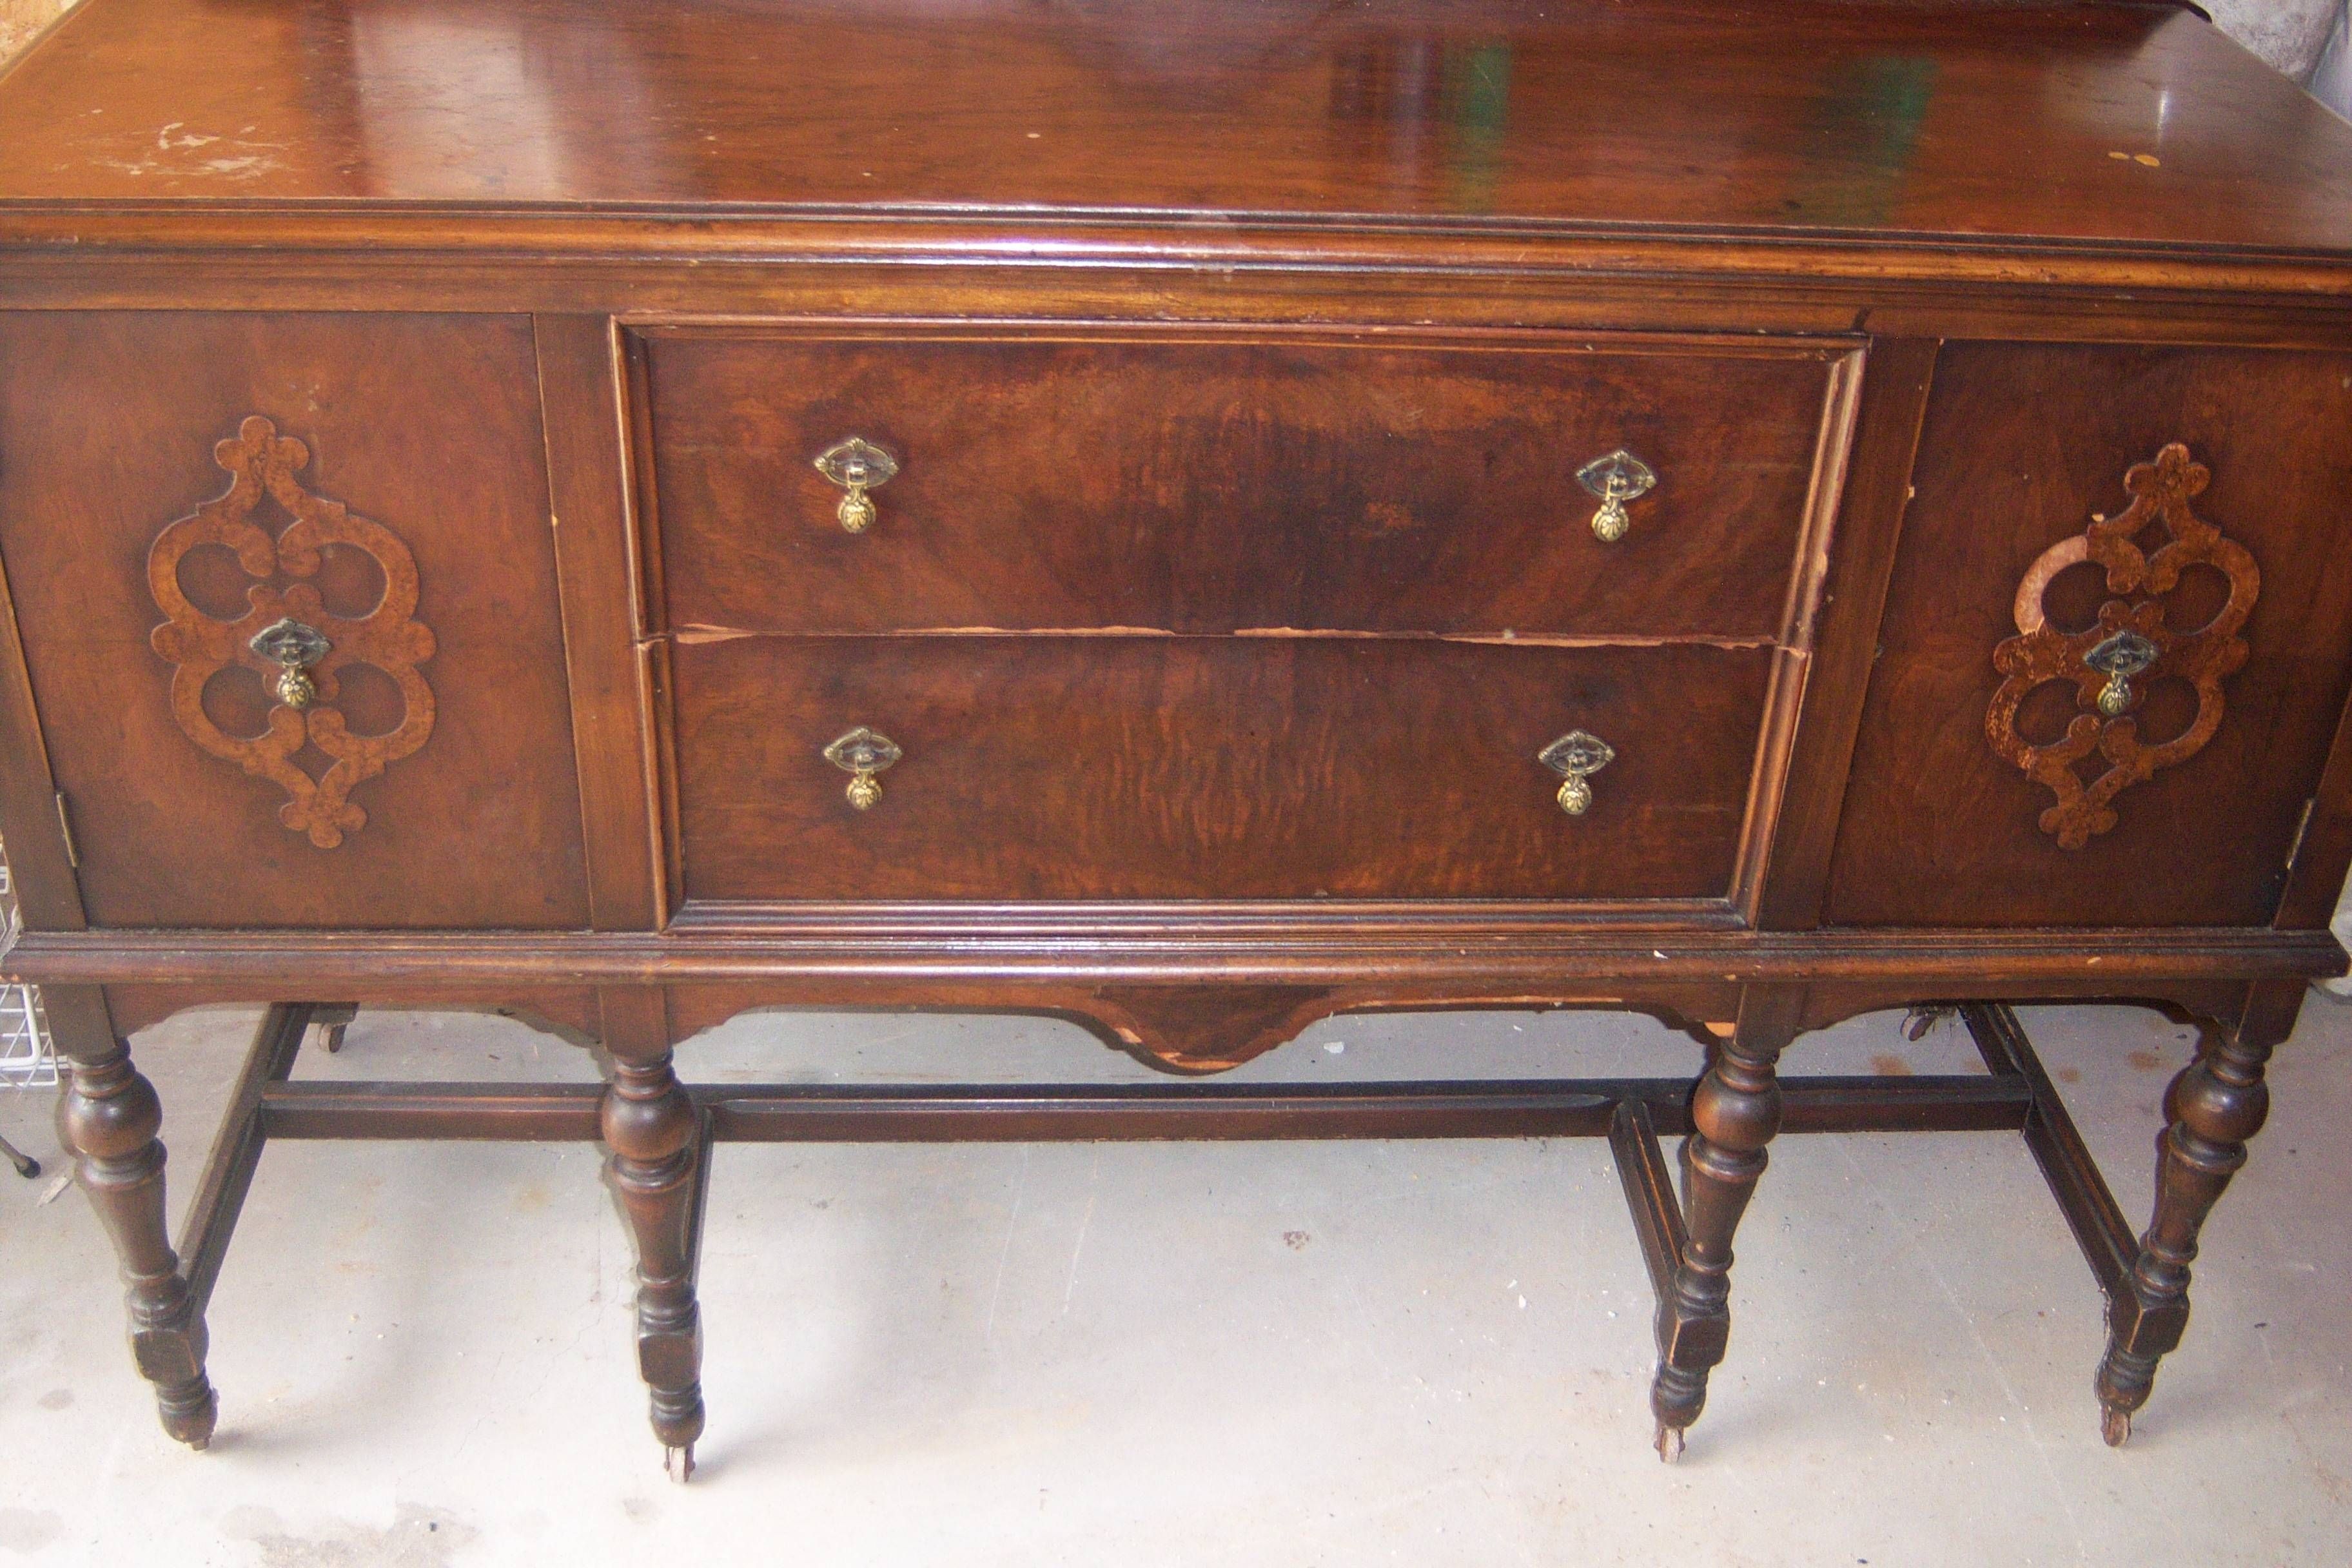 Antique Sideboard Buffet For Sale | Antiques | Classifieds For Sideboards For Sale (View 3 of 30)